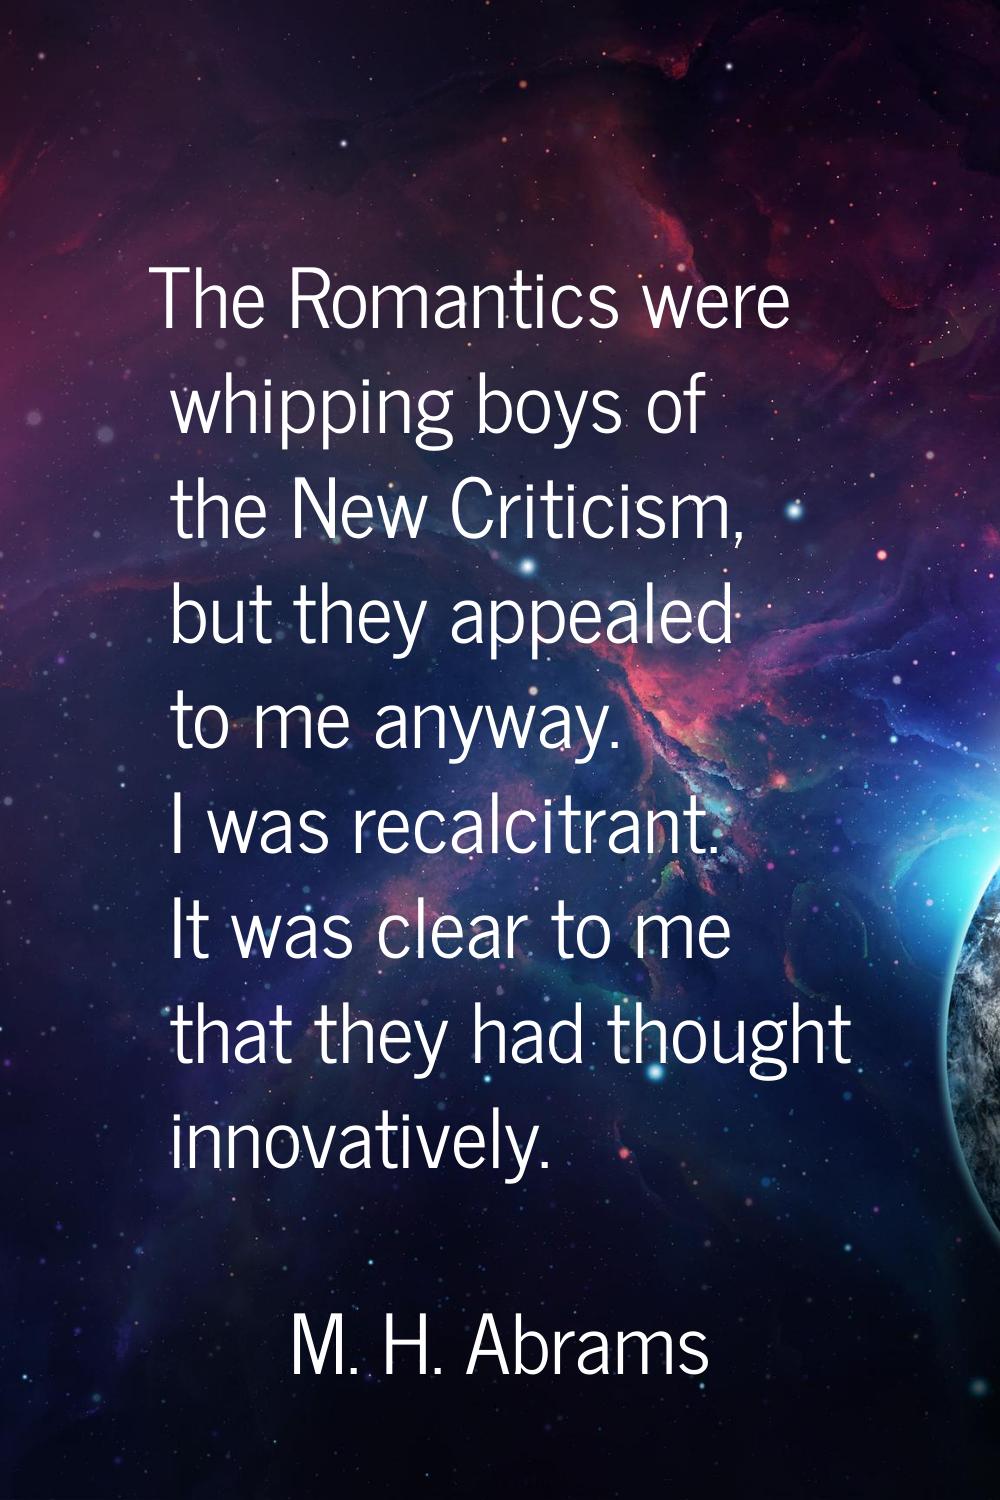 The Romantics were whipping boys of the New Criticism, but they appealed to me anyway. I was recalc